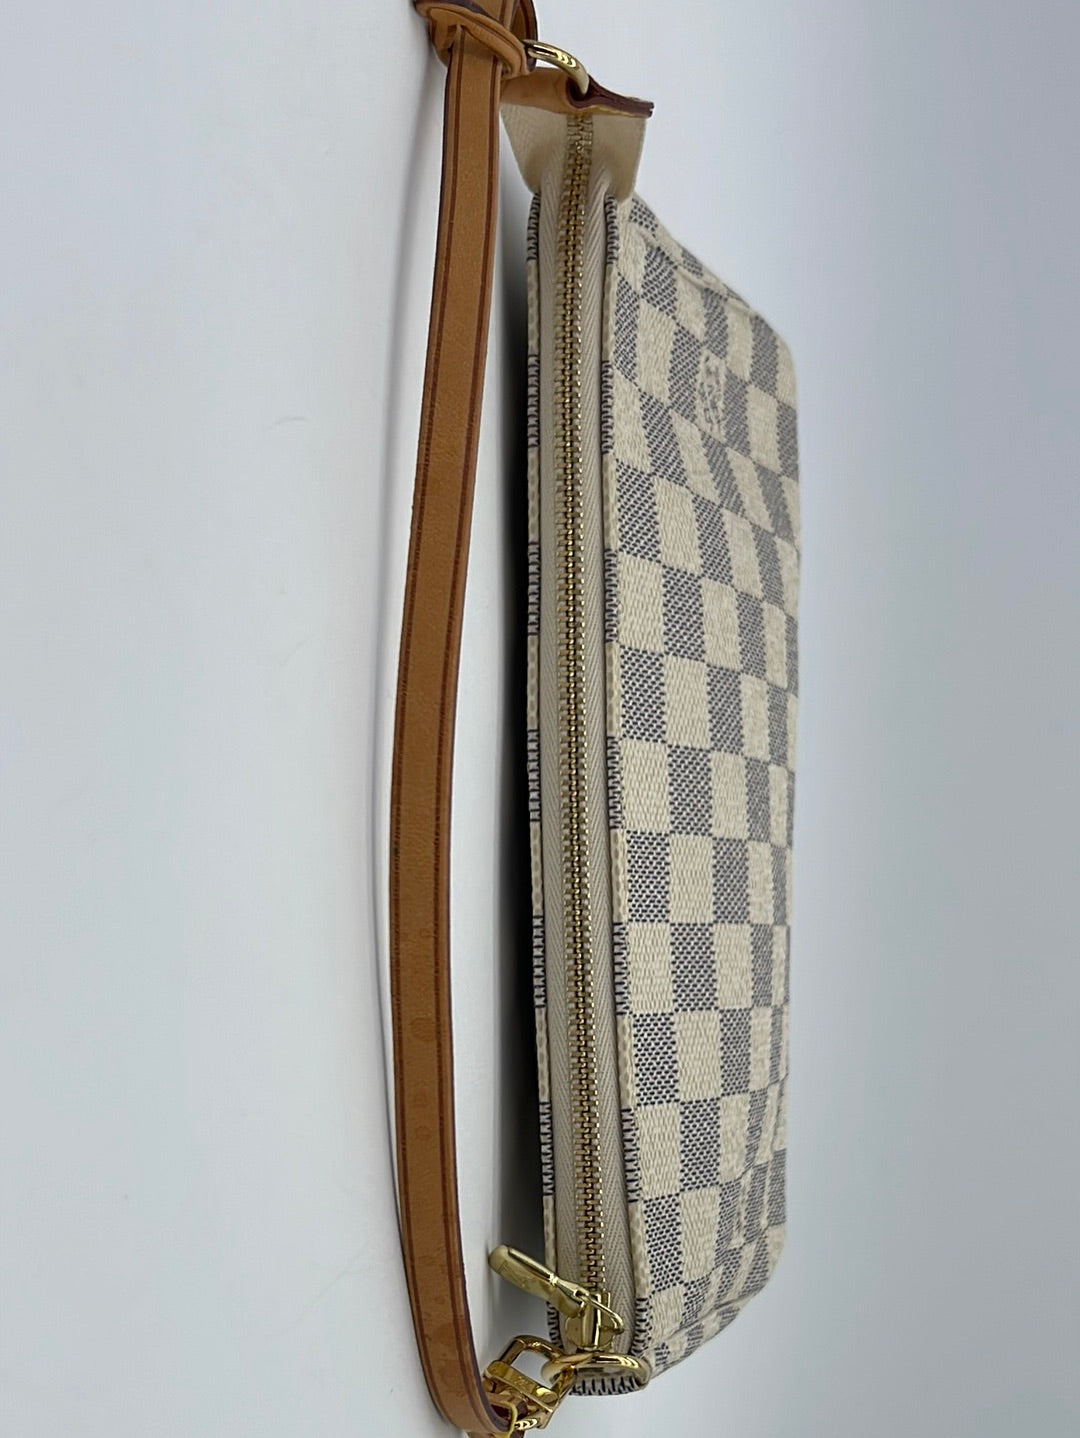 Louis Vuitton Damier Azur Pochette ○ Labellov ○ Buy and Sell Authentic  Luxury